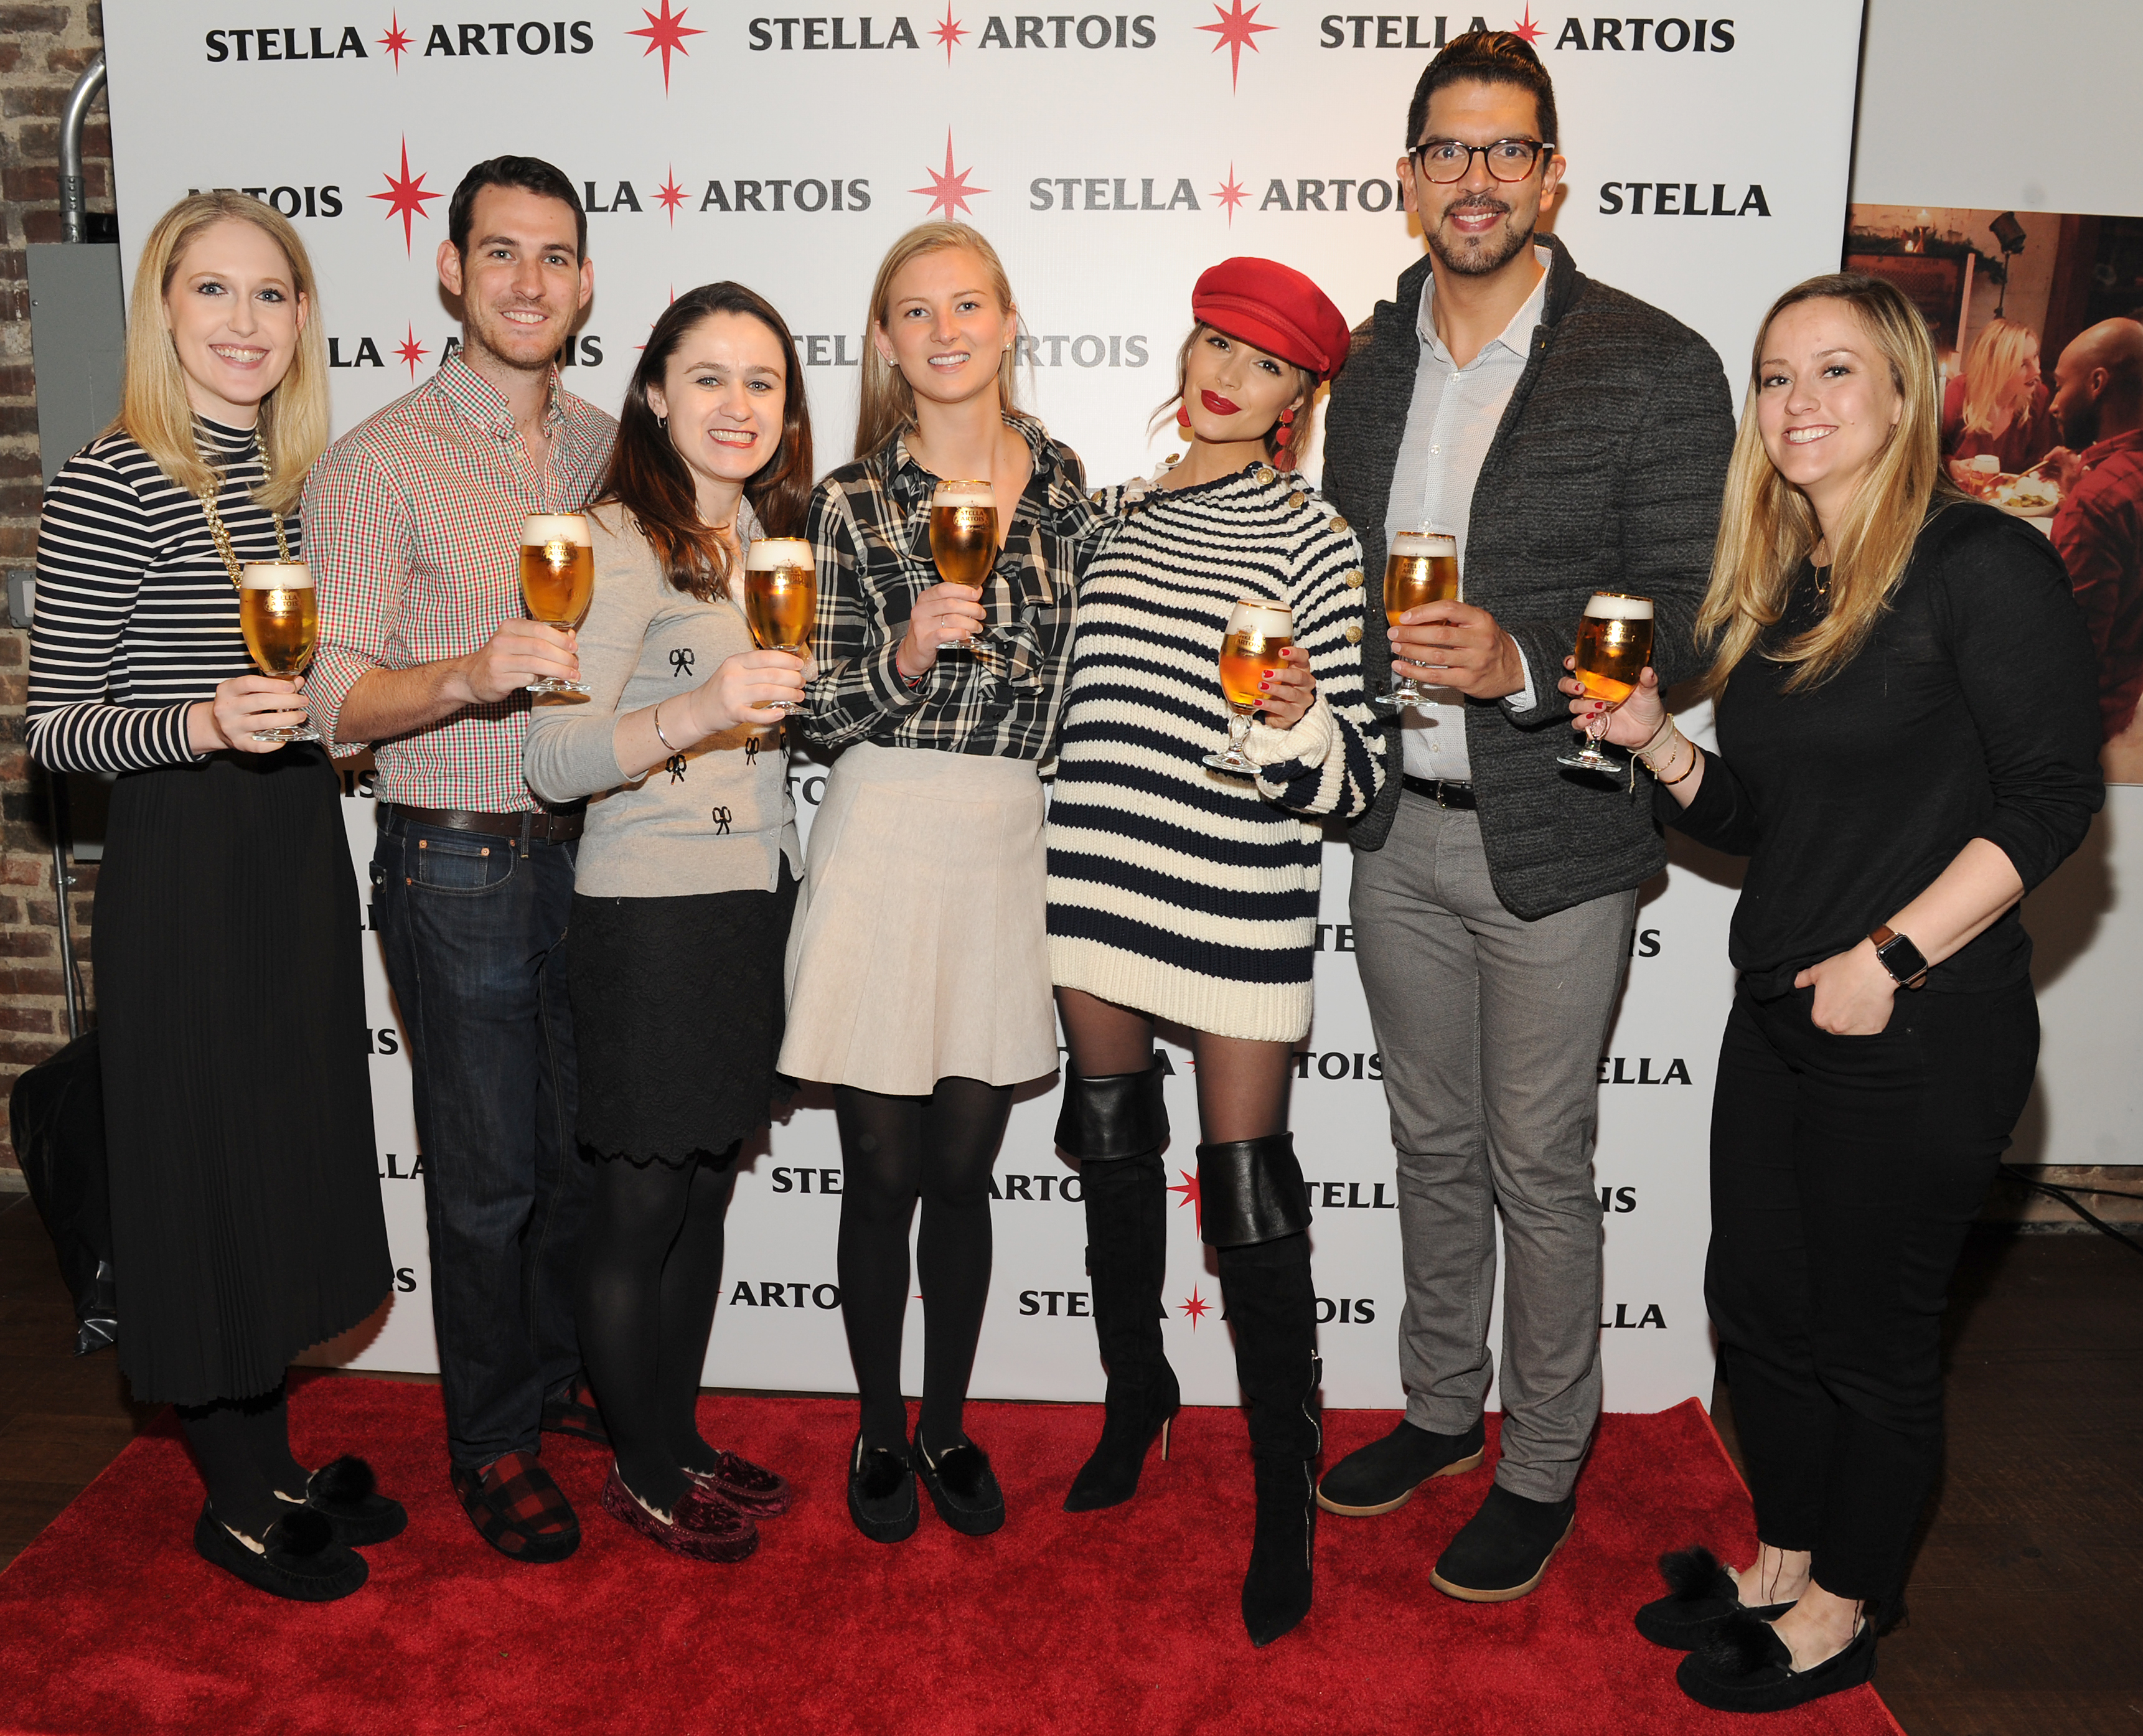 Actress and influencer Olivia Culpo teamed up with Stella Artois to inspire Americans to shine this holiday season in celebration of the brand's "Host One to Remember" campaign in New York City on November 7, 2017.